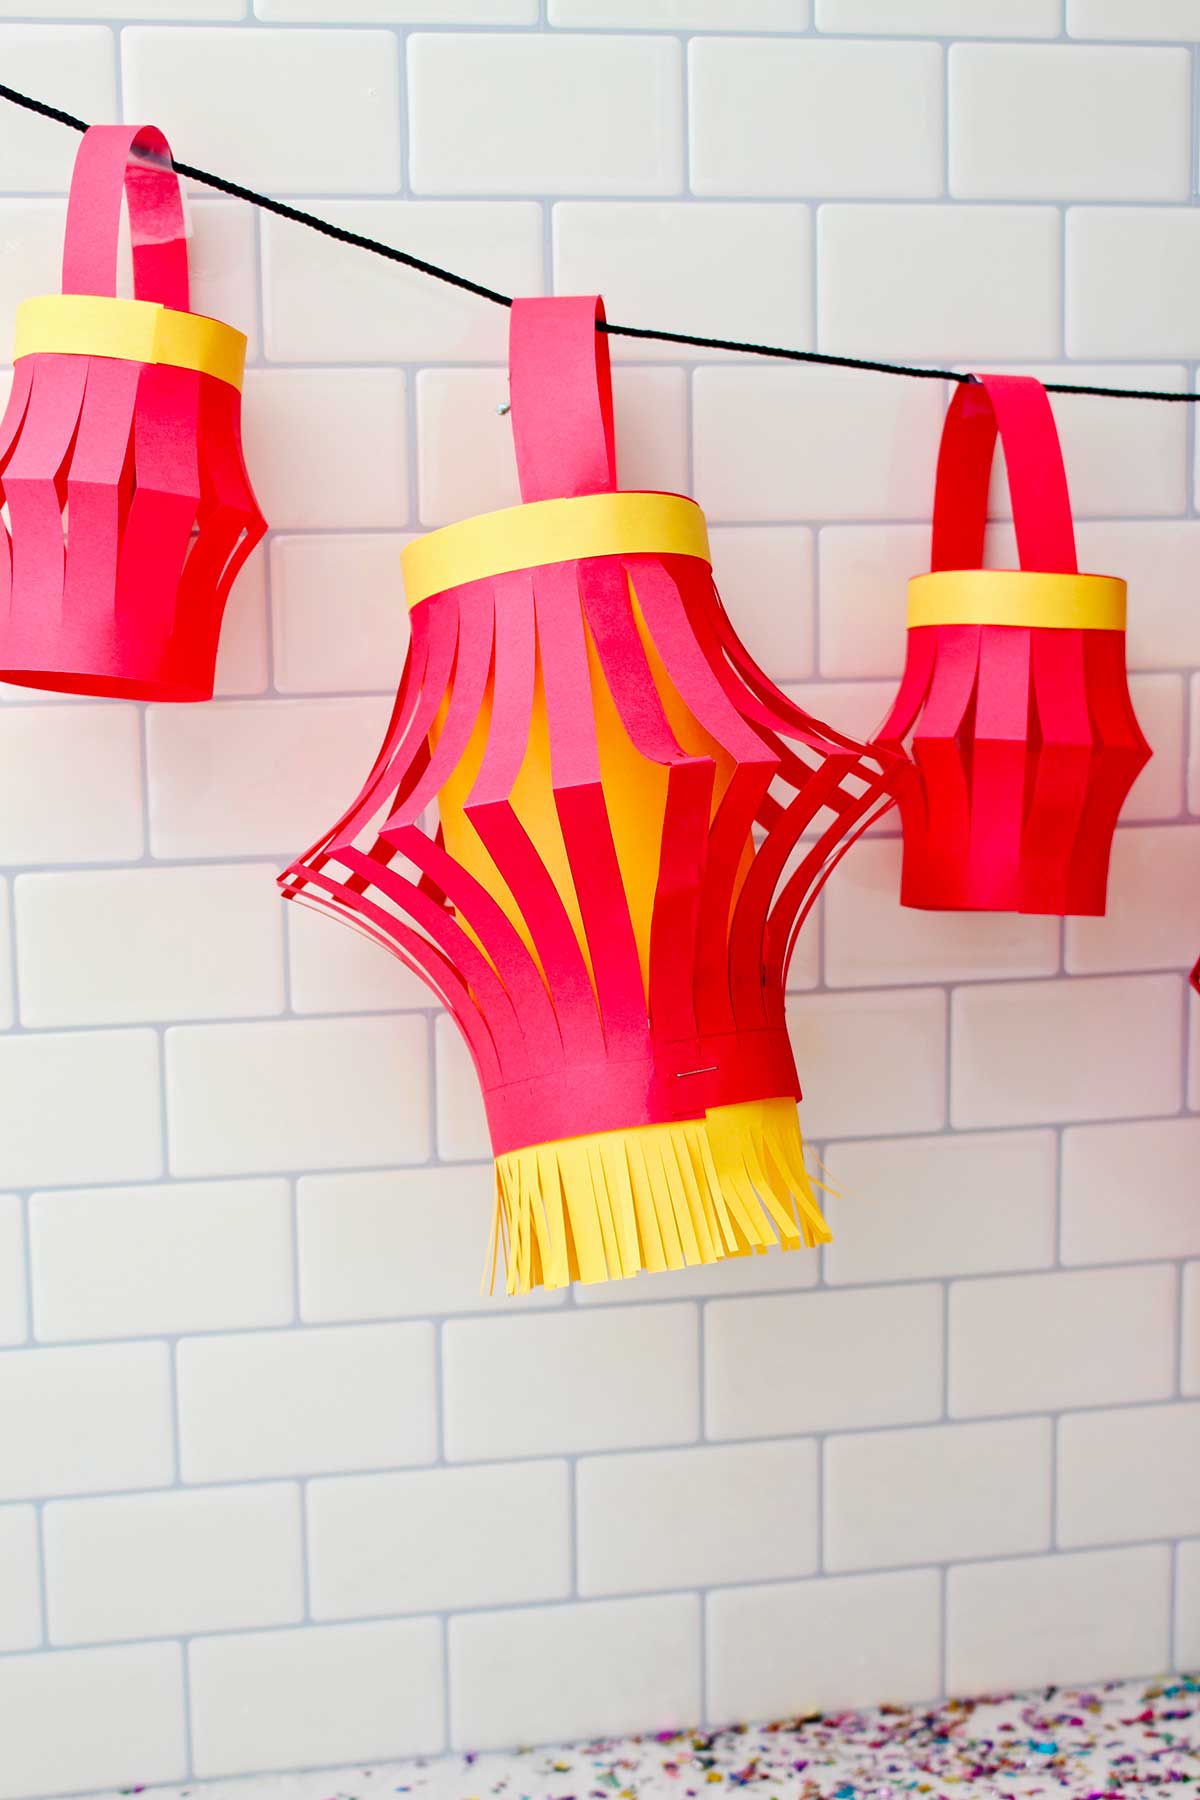 Three completed paper lanterns hanging against a subway tile backdrop.